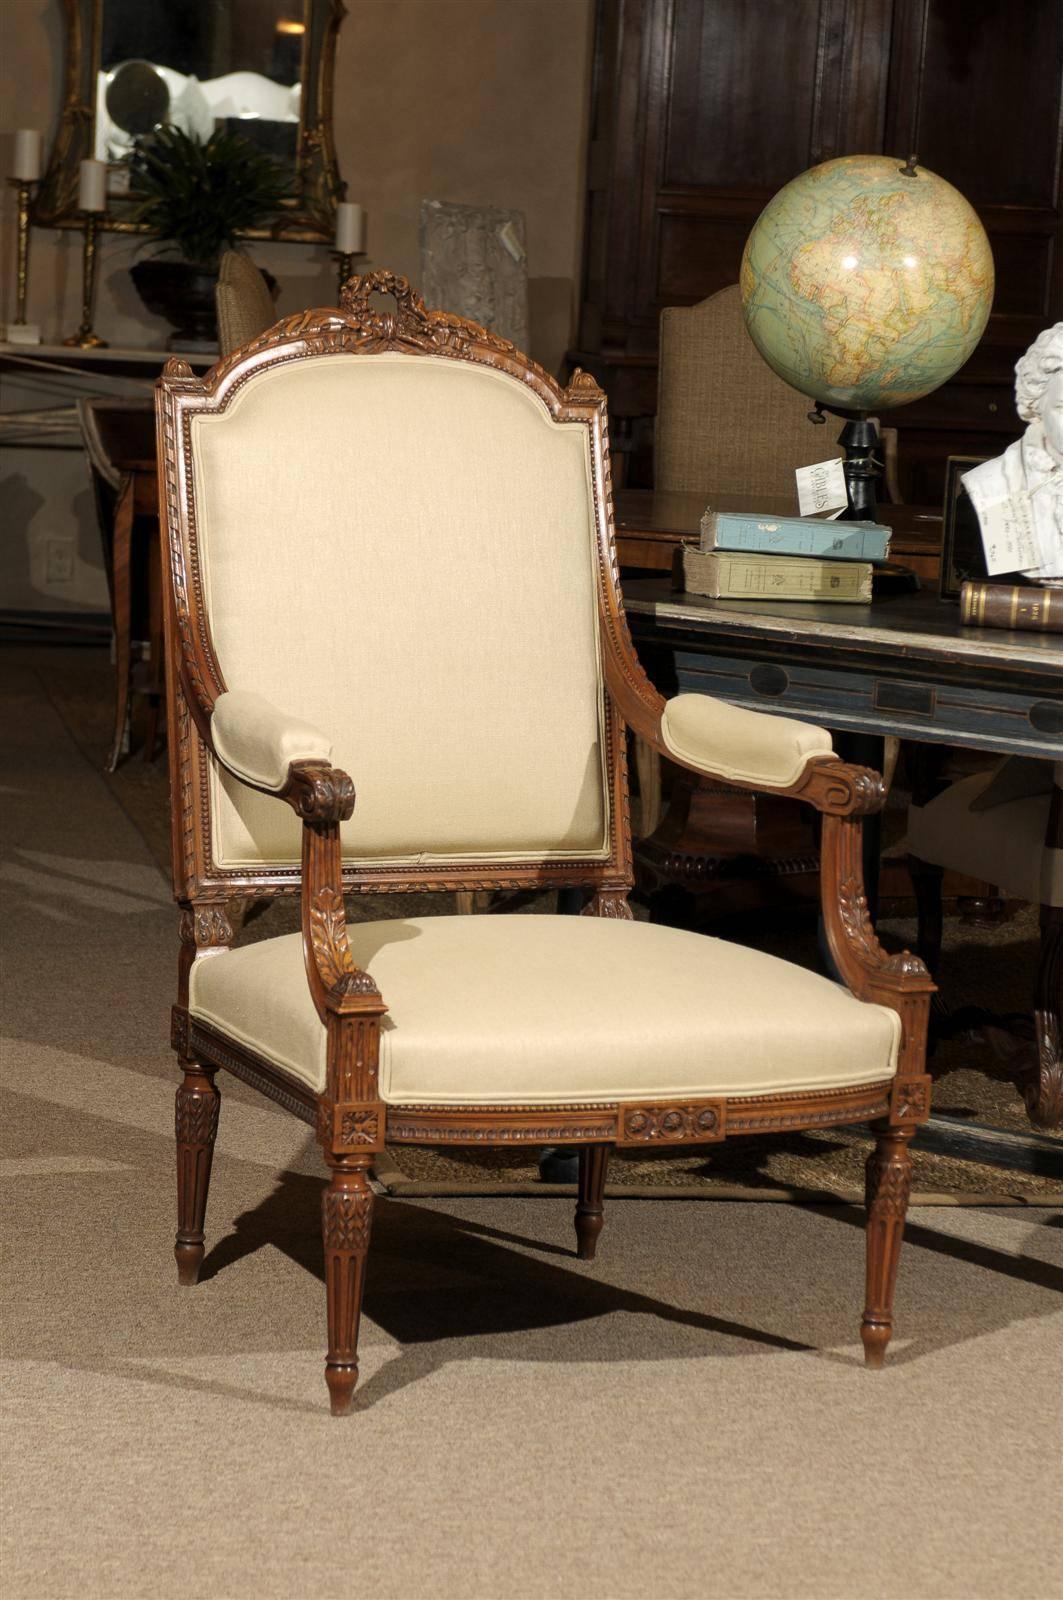 Single Antique Louis XVI Style Armchair in Walnut, circa 1870
Here is a single antique French armchair hand-carved in walnut. The style is classic Louis XVI including straight fluted legs. The carving is elaborate and includes flowers, oak leaves